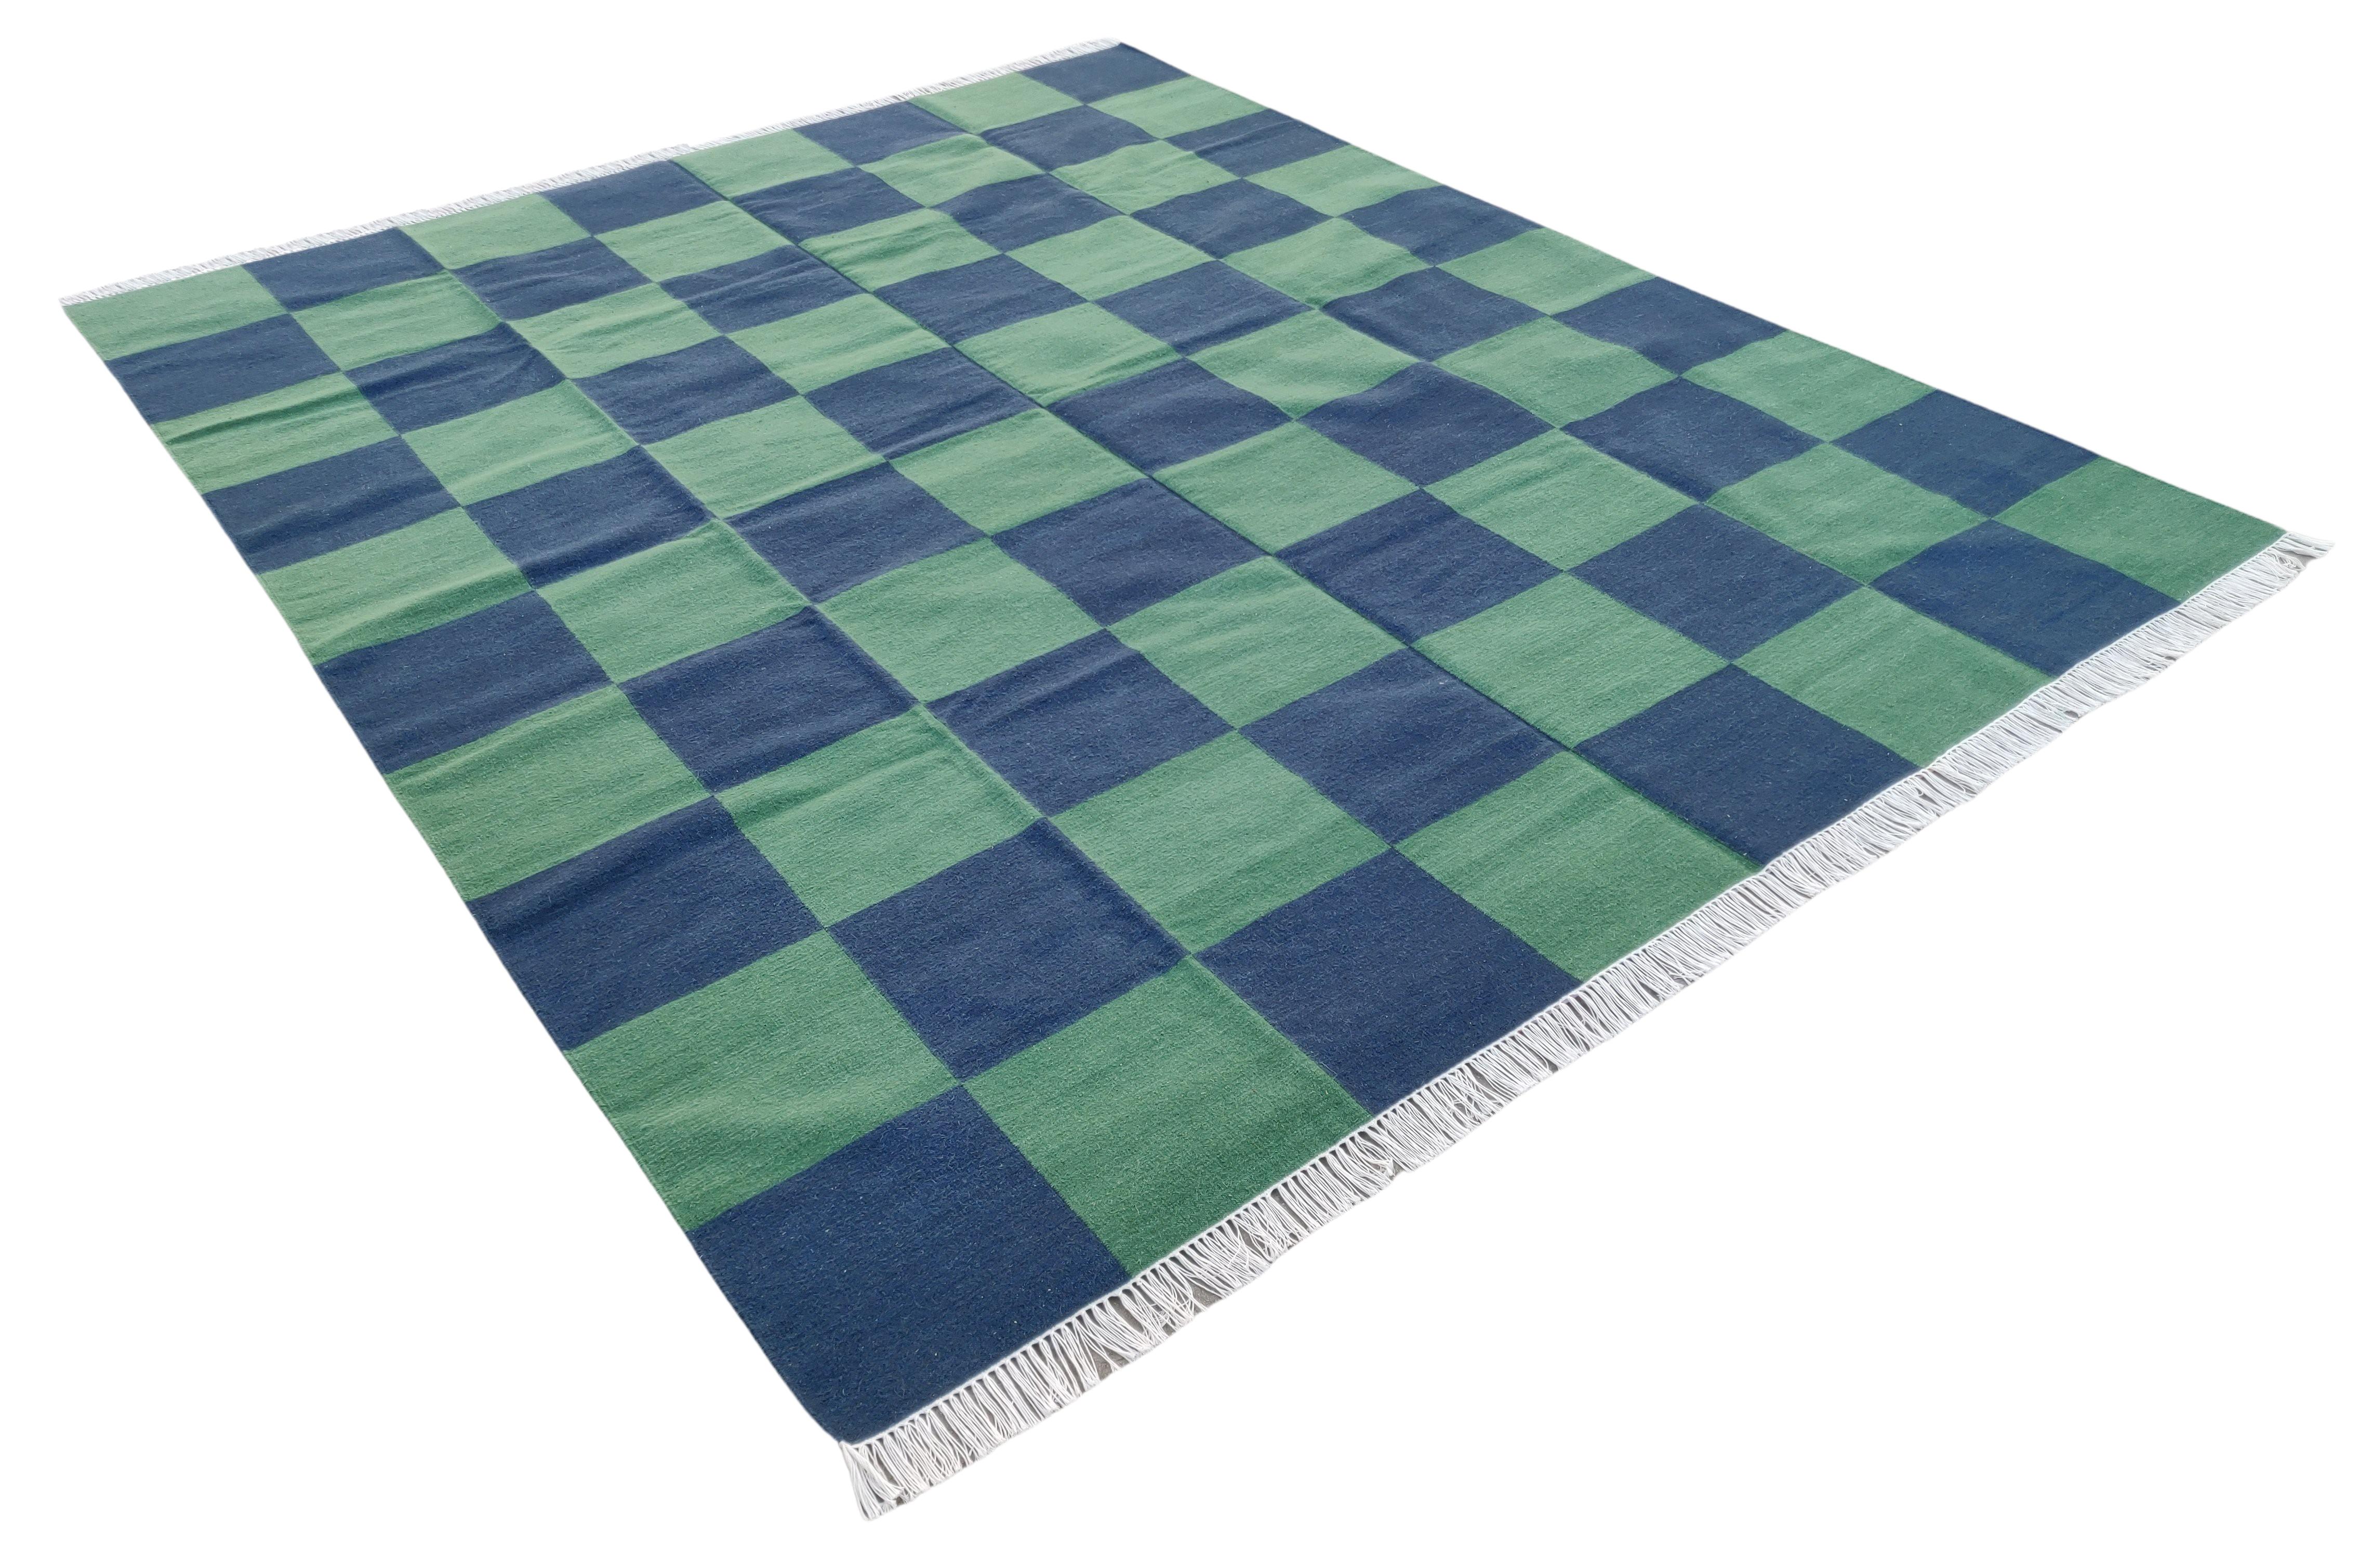 Mid-Century Modern Handmade Woolen Area Flat Weave Rug, 6x9 Blue And Green Tile Checked Dhurrie Rug For Sale